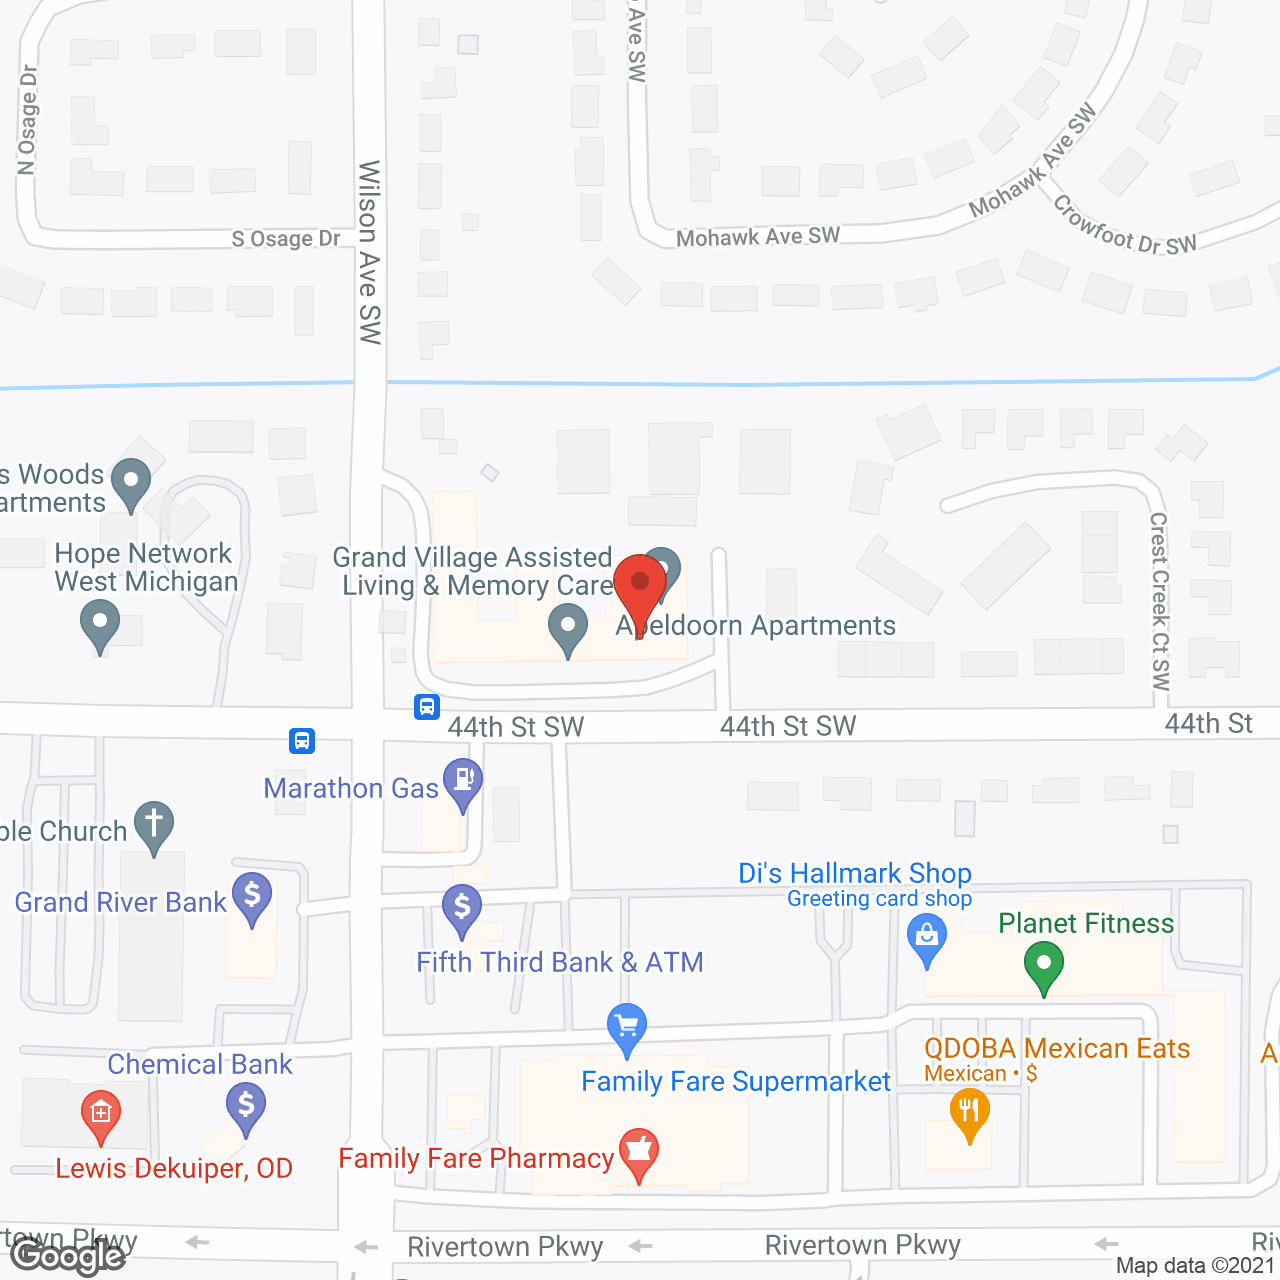 Grand Village Assisted Living & Memory Care in google map